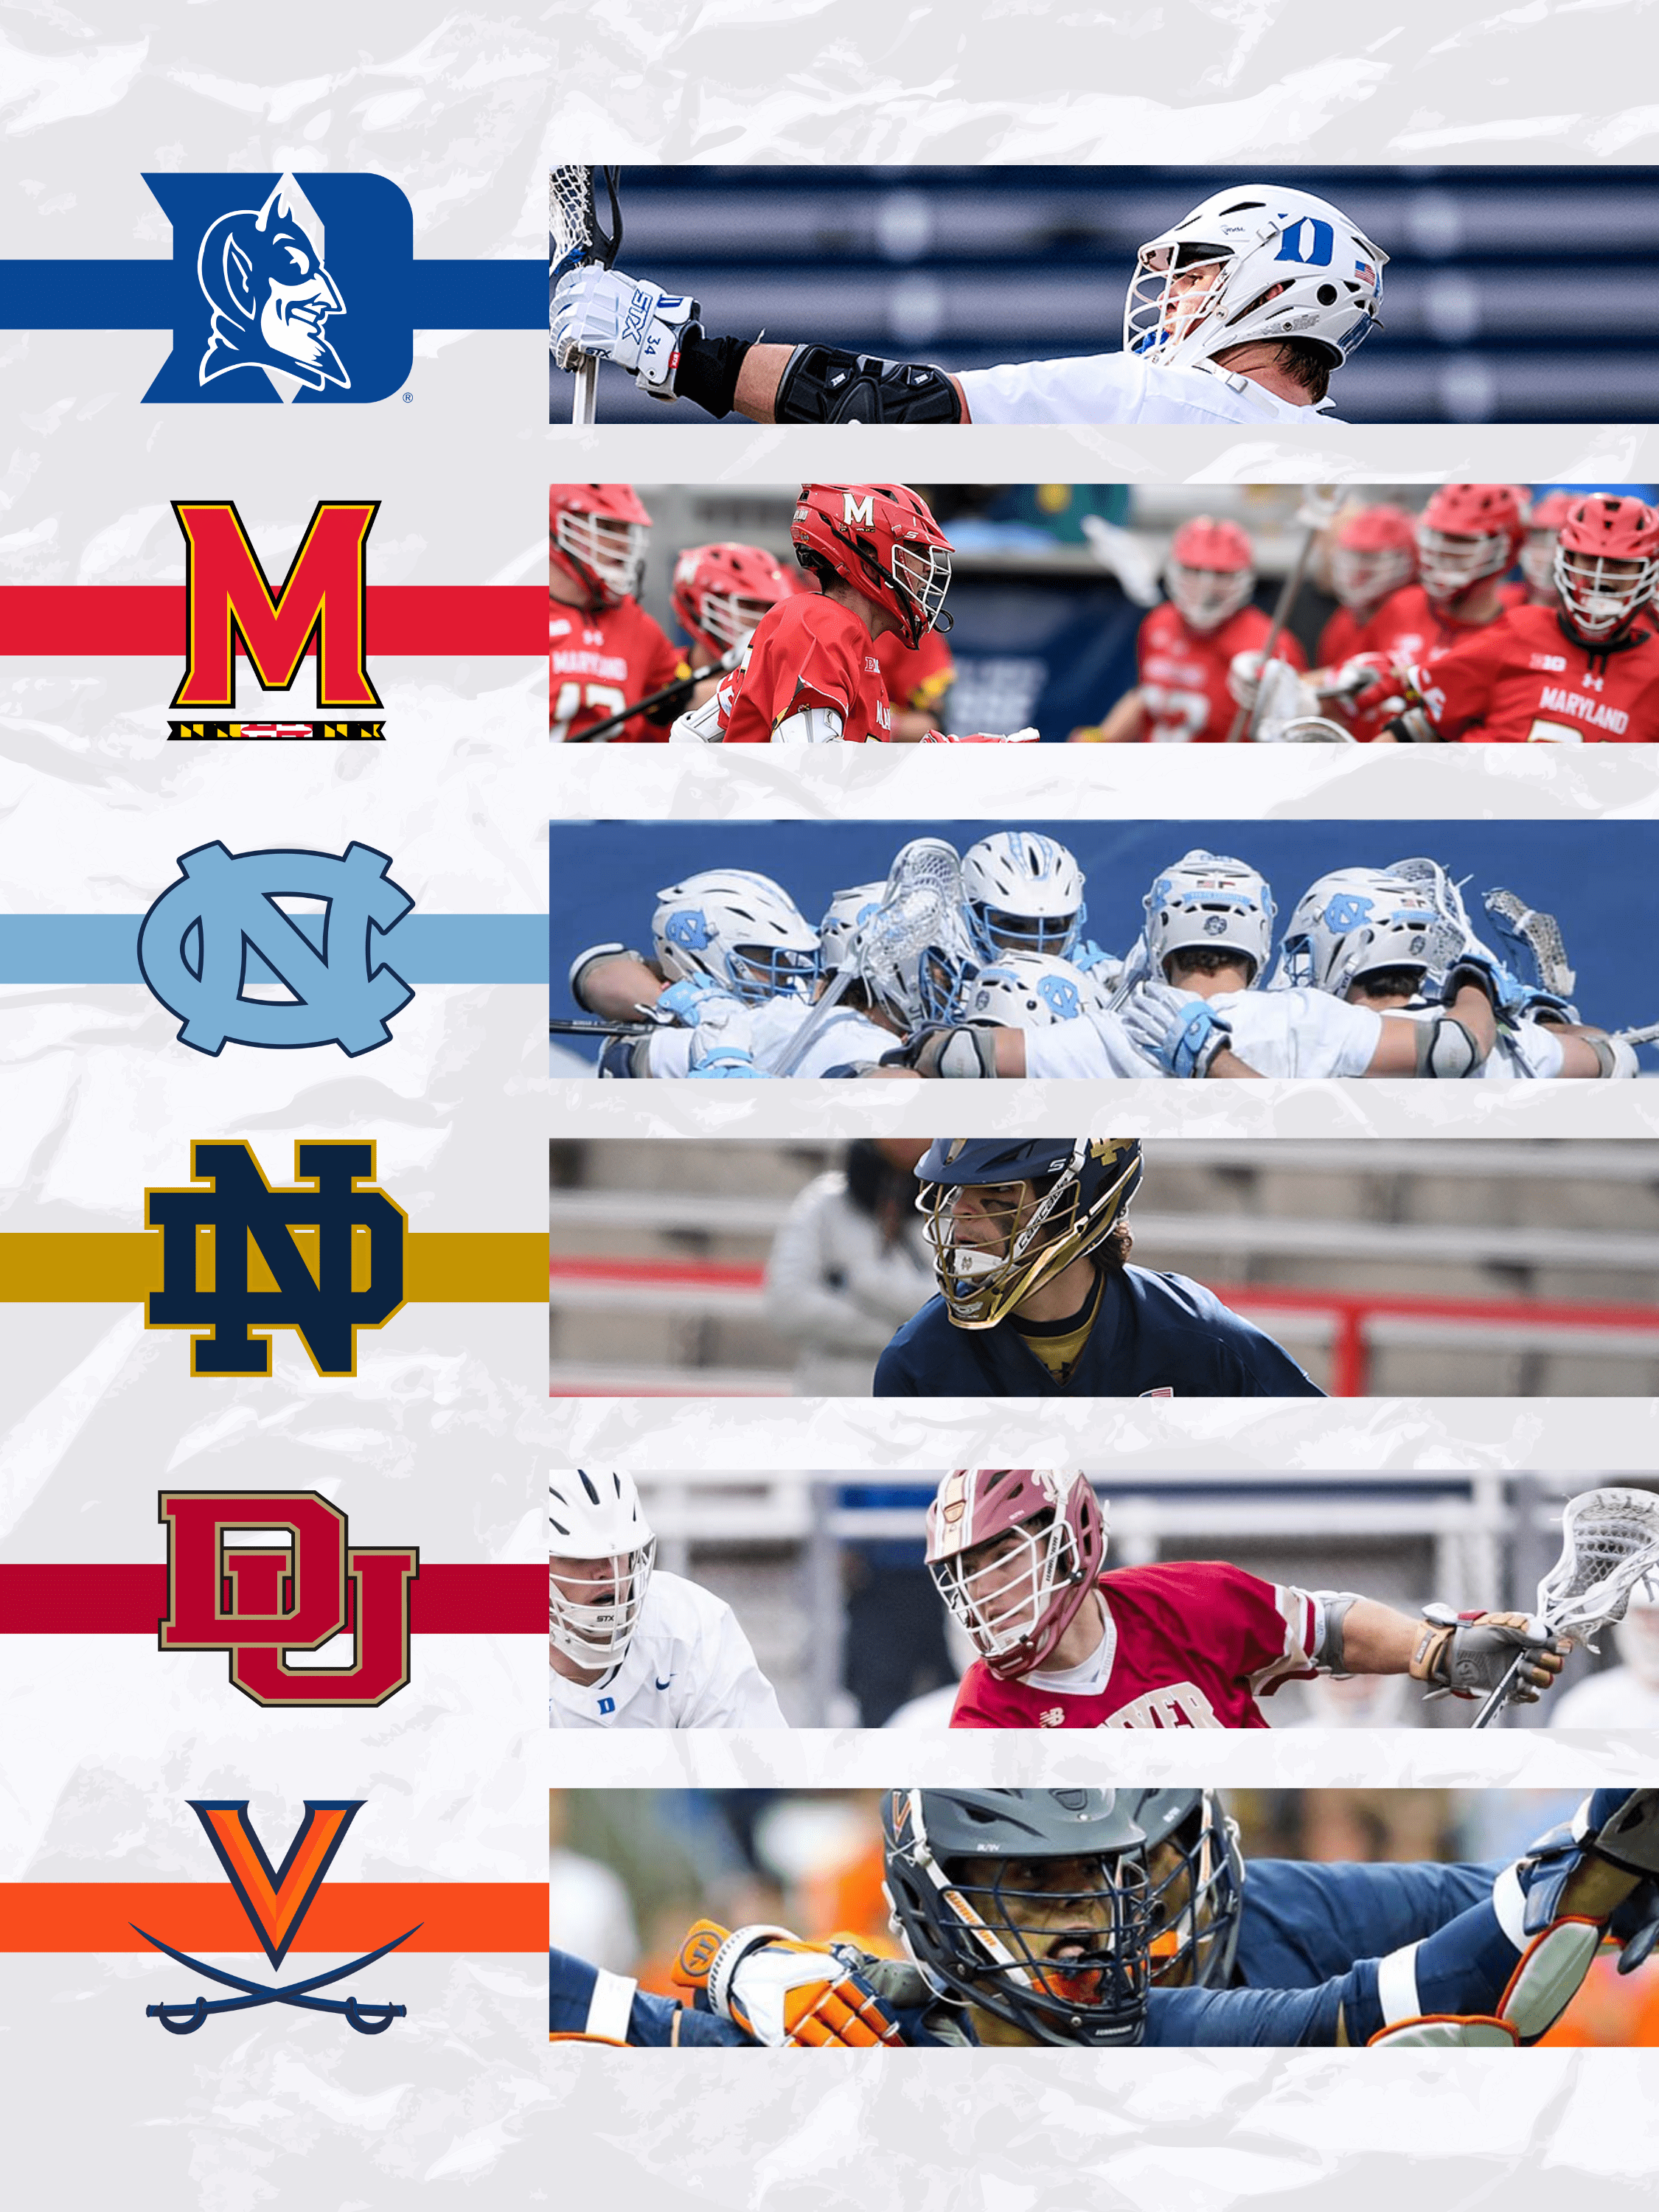 With the 2021 NCAA DI men's lacrosse season in full swing, the weekly rankings are back, listing out the nation's top-20 teams.